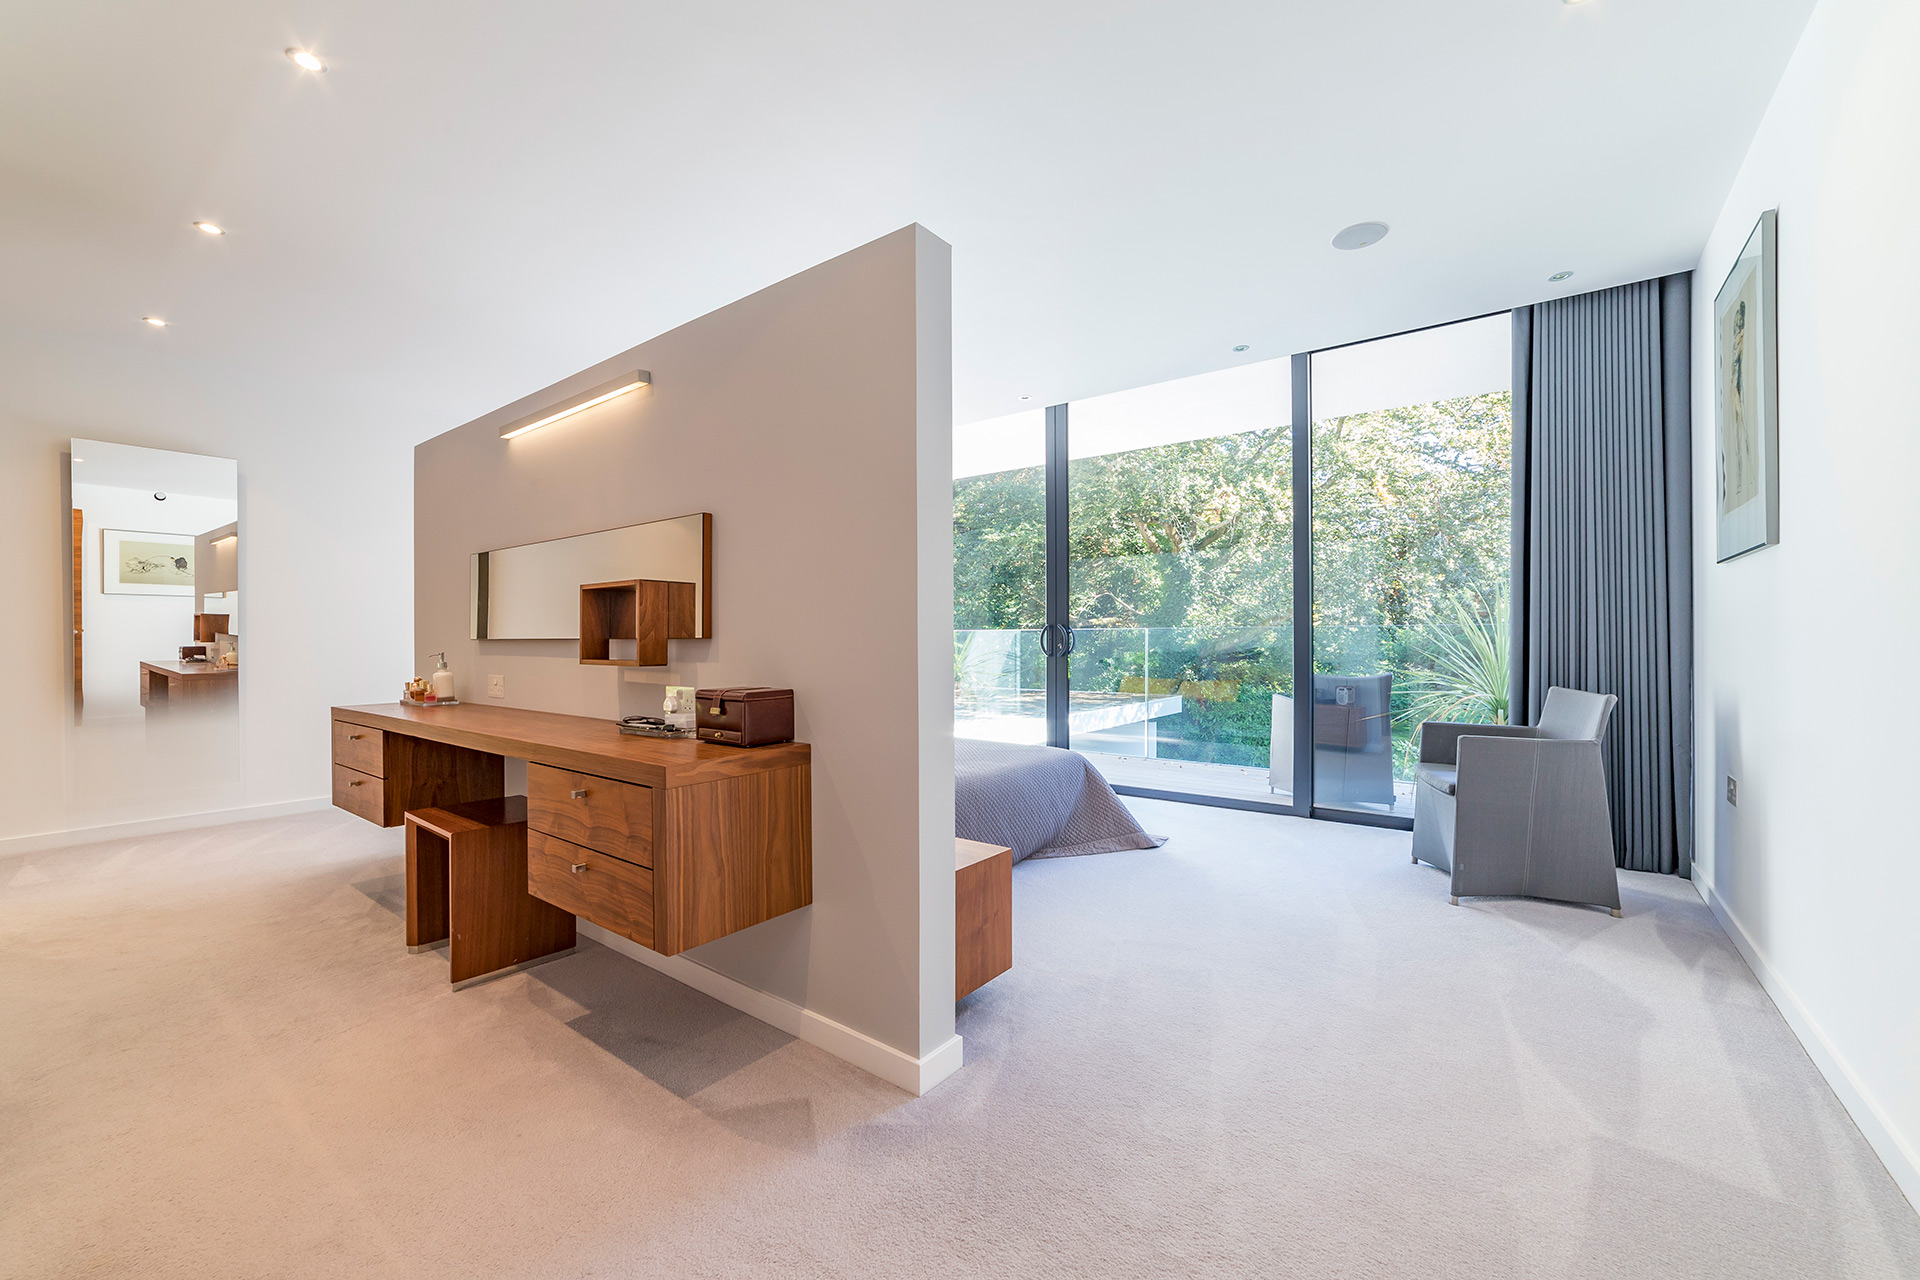 interior of master bedroom with large glass sliding doors onto balcony and internal privacy wall